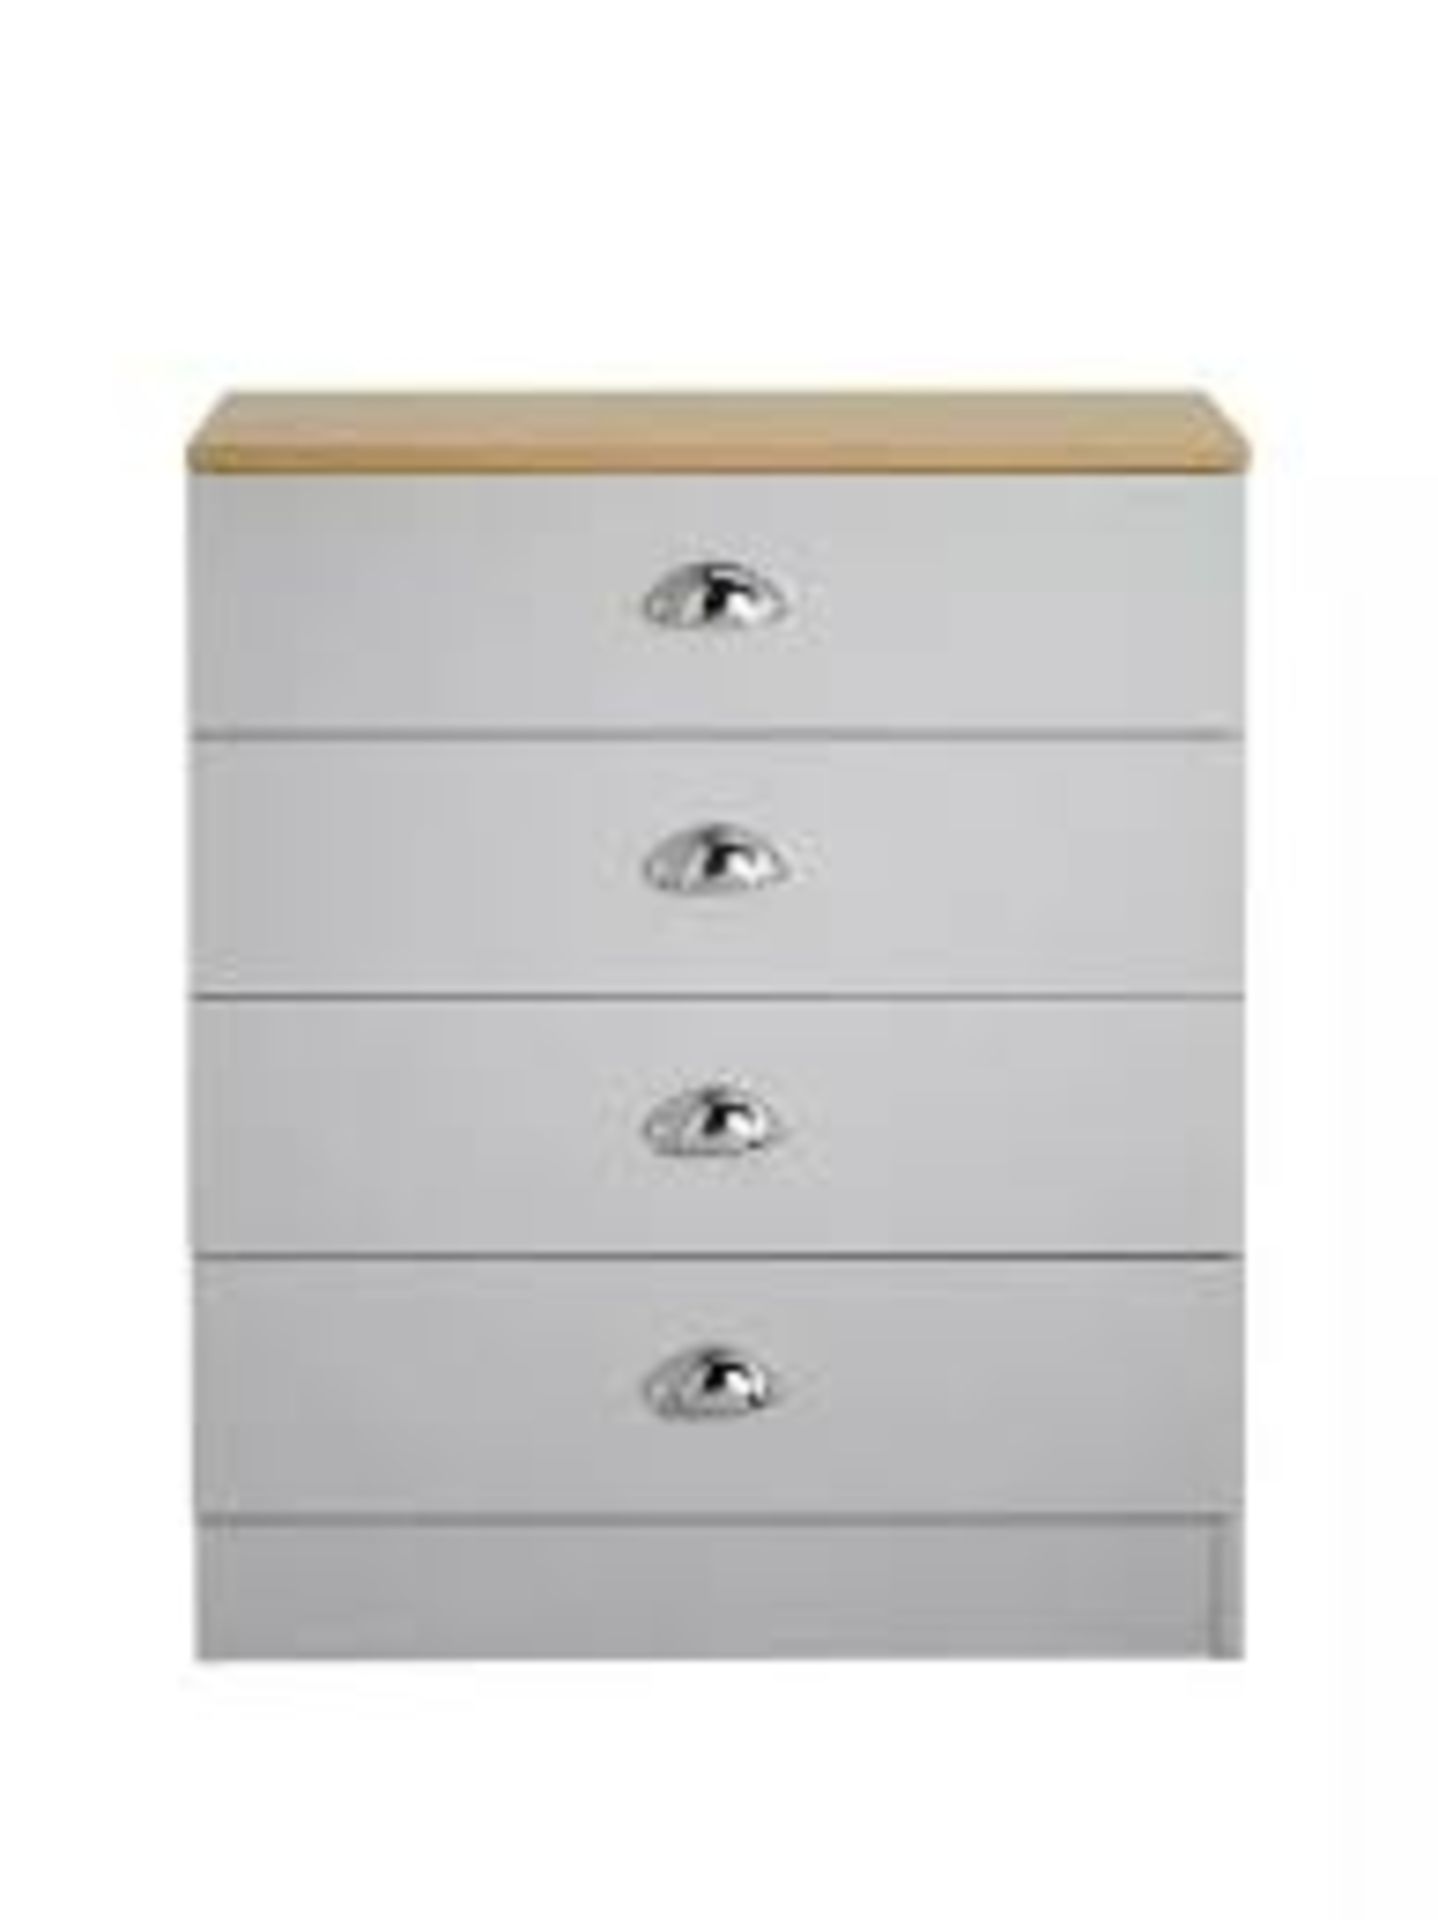 Lloyd Pascal Grey & Oak 4 Drawer Chest RRP £70 boxed unchecked